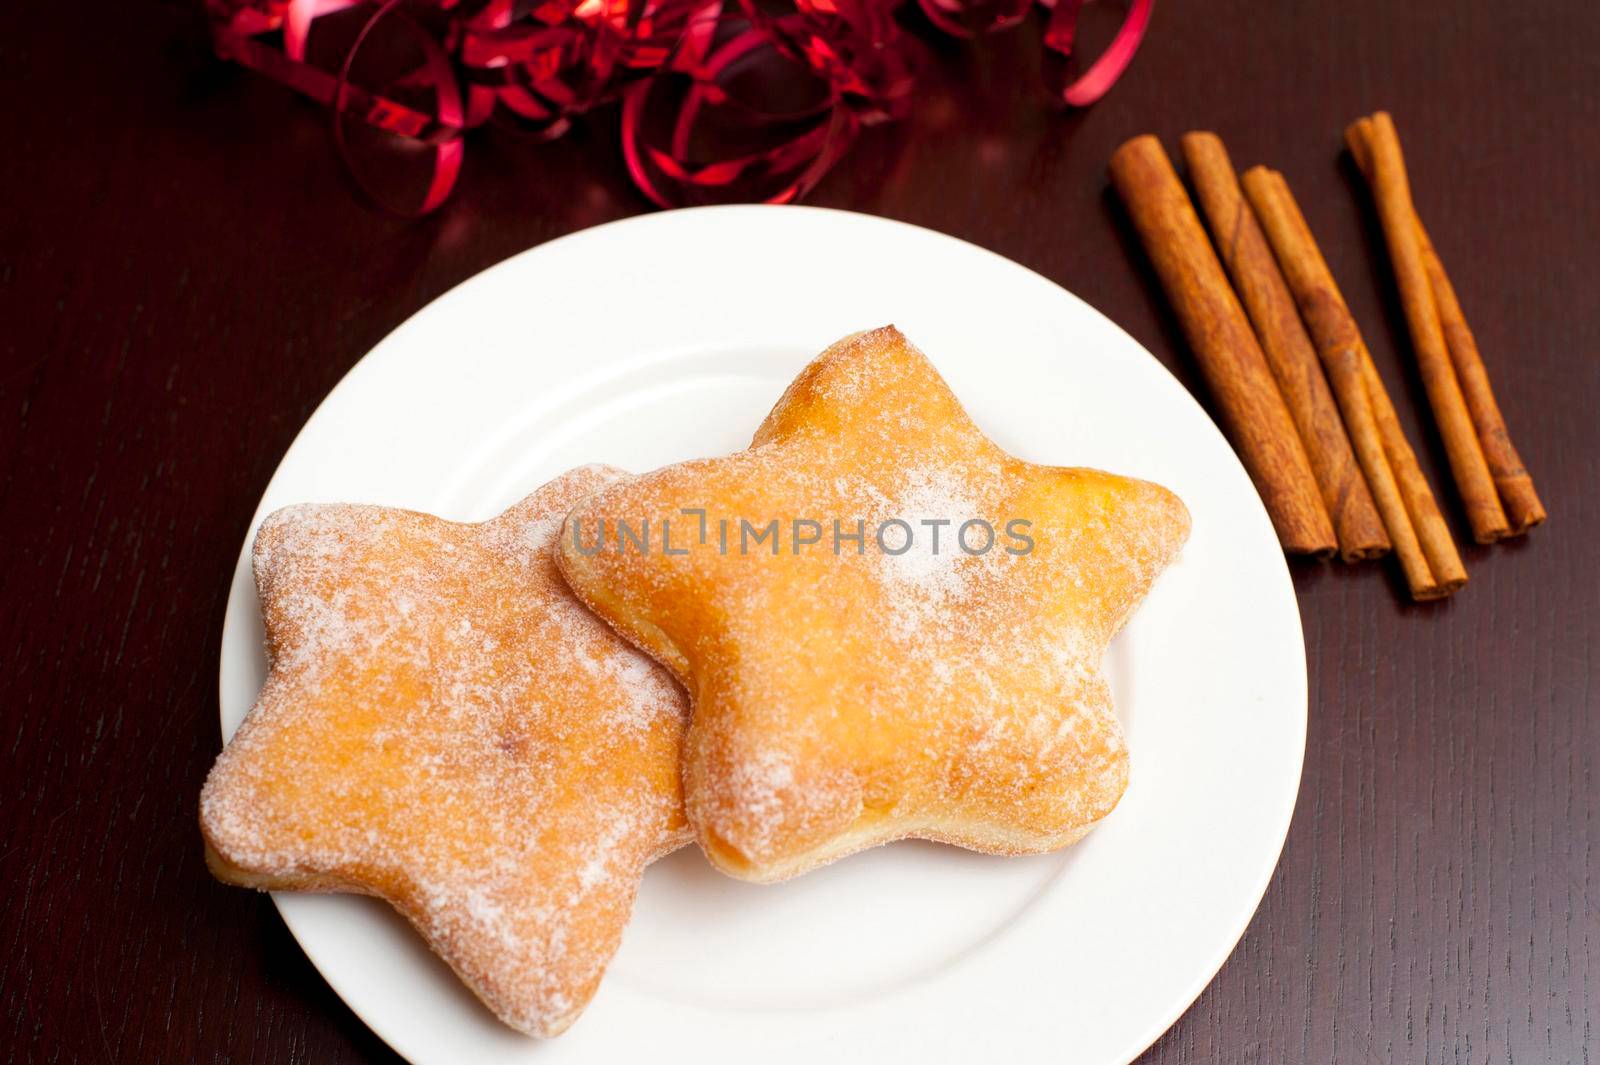 Star shaped sugared doughnuts on a plate for a festive seasonal Christmas dessert or snack